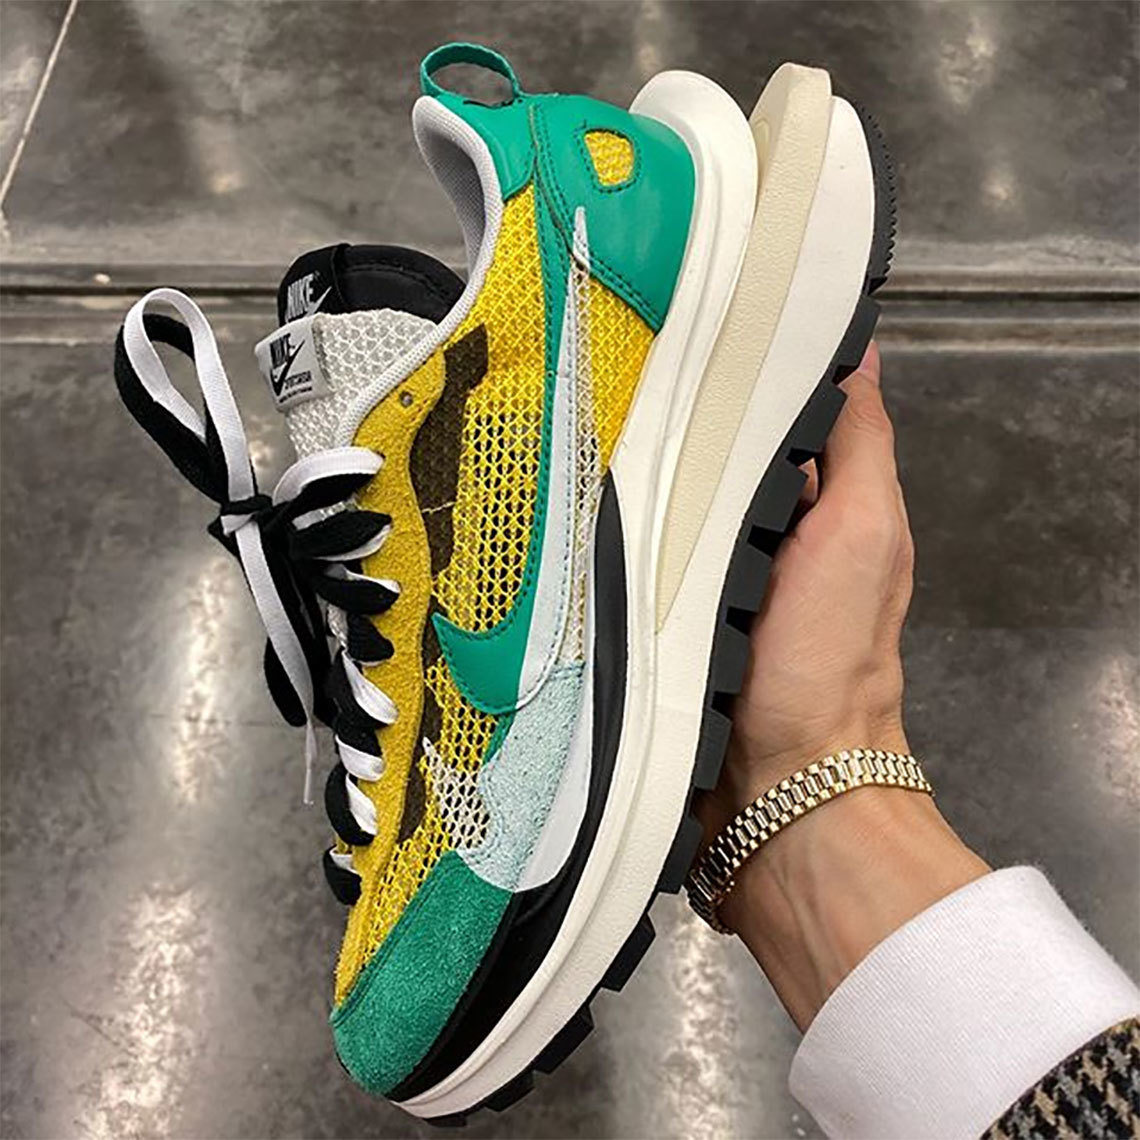 Nike x Sacai Ready To Drop The Sneaker Of Our Dreams